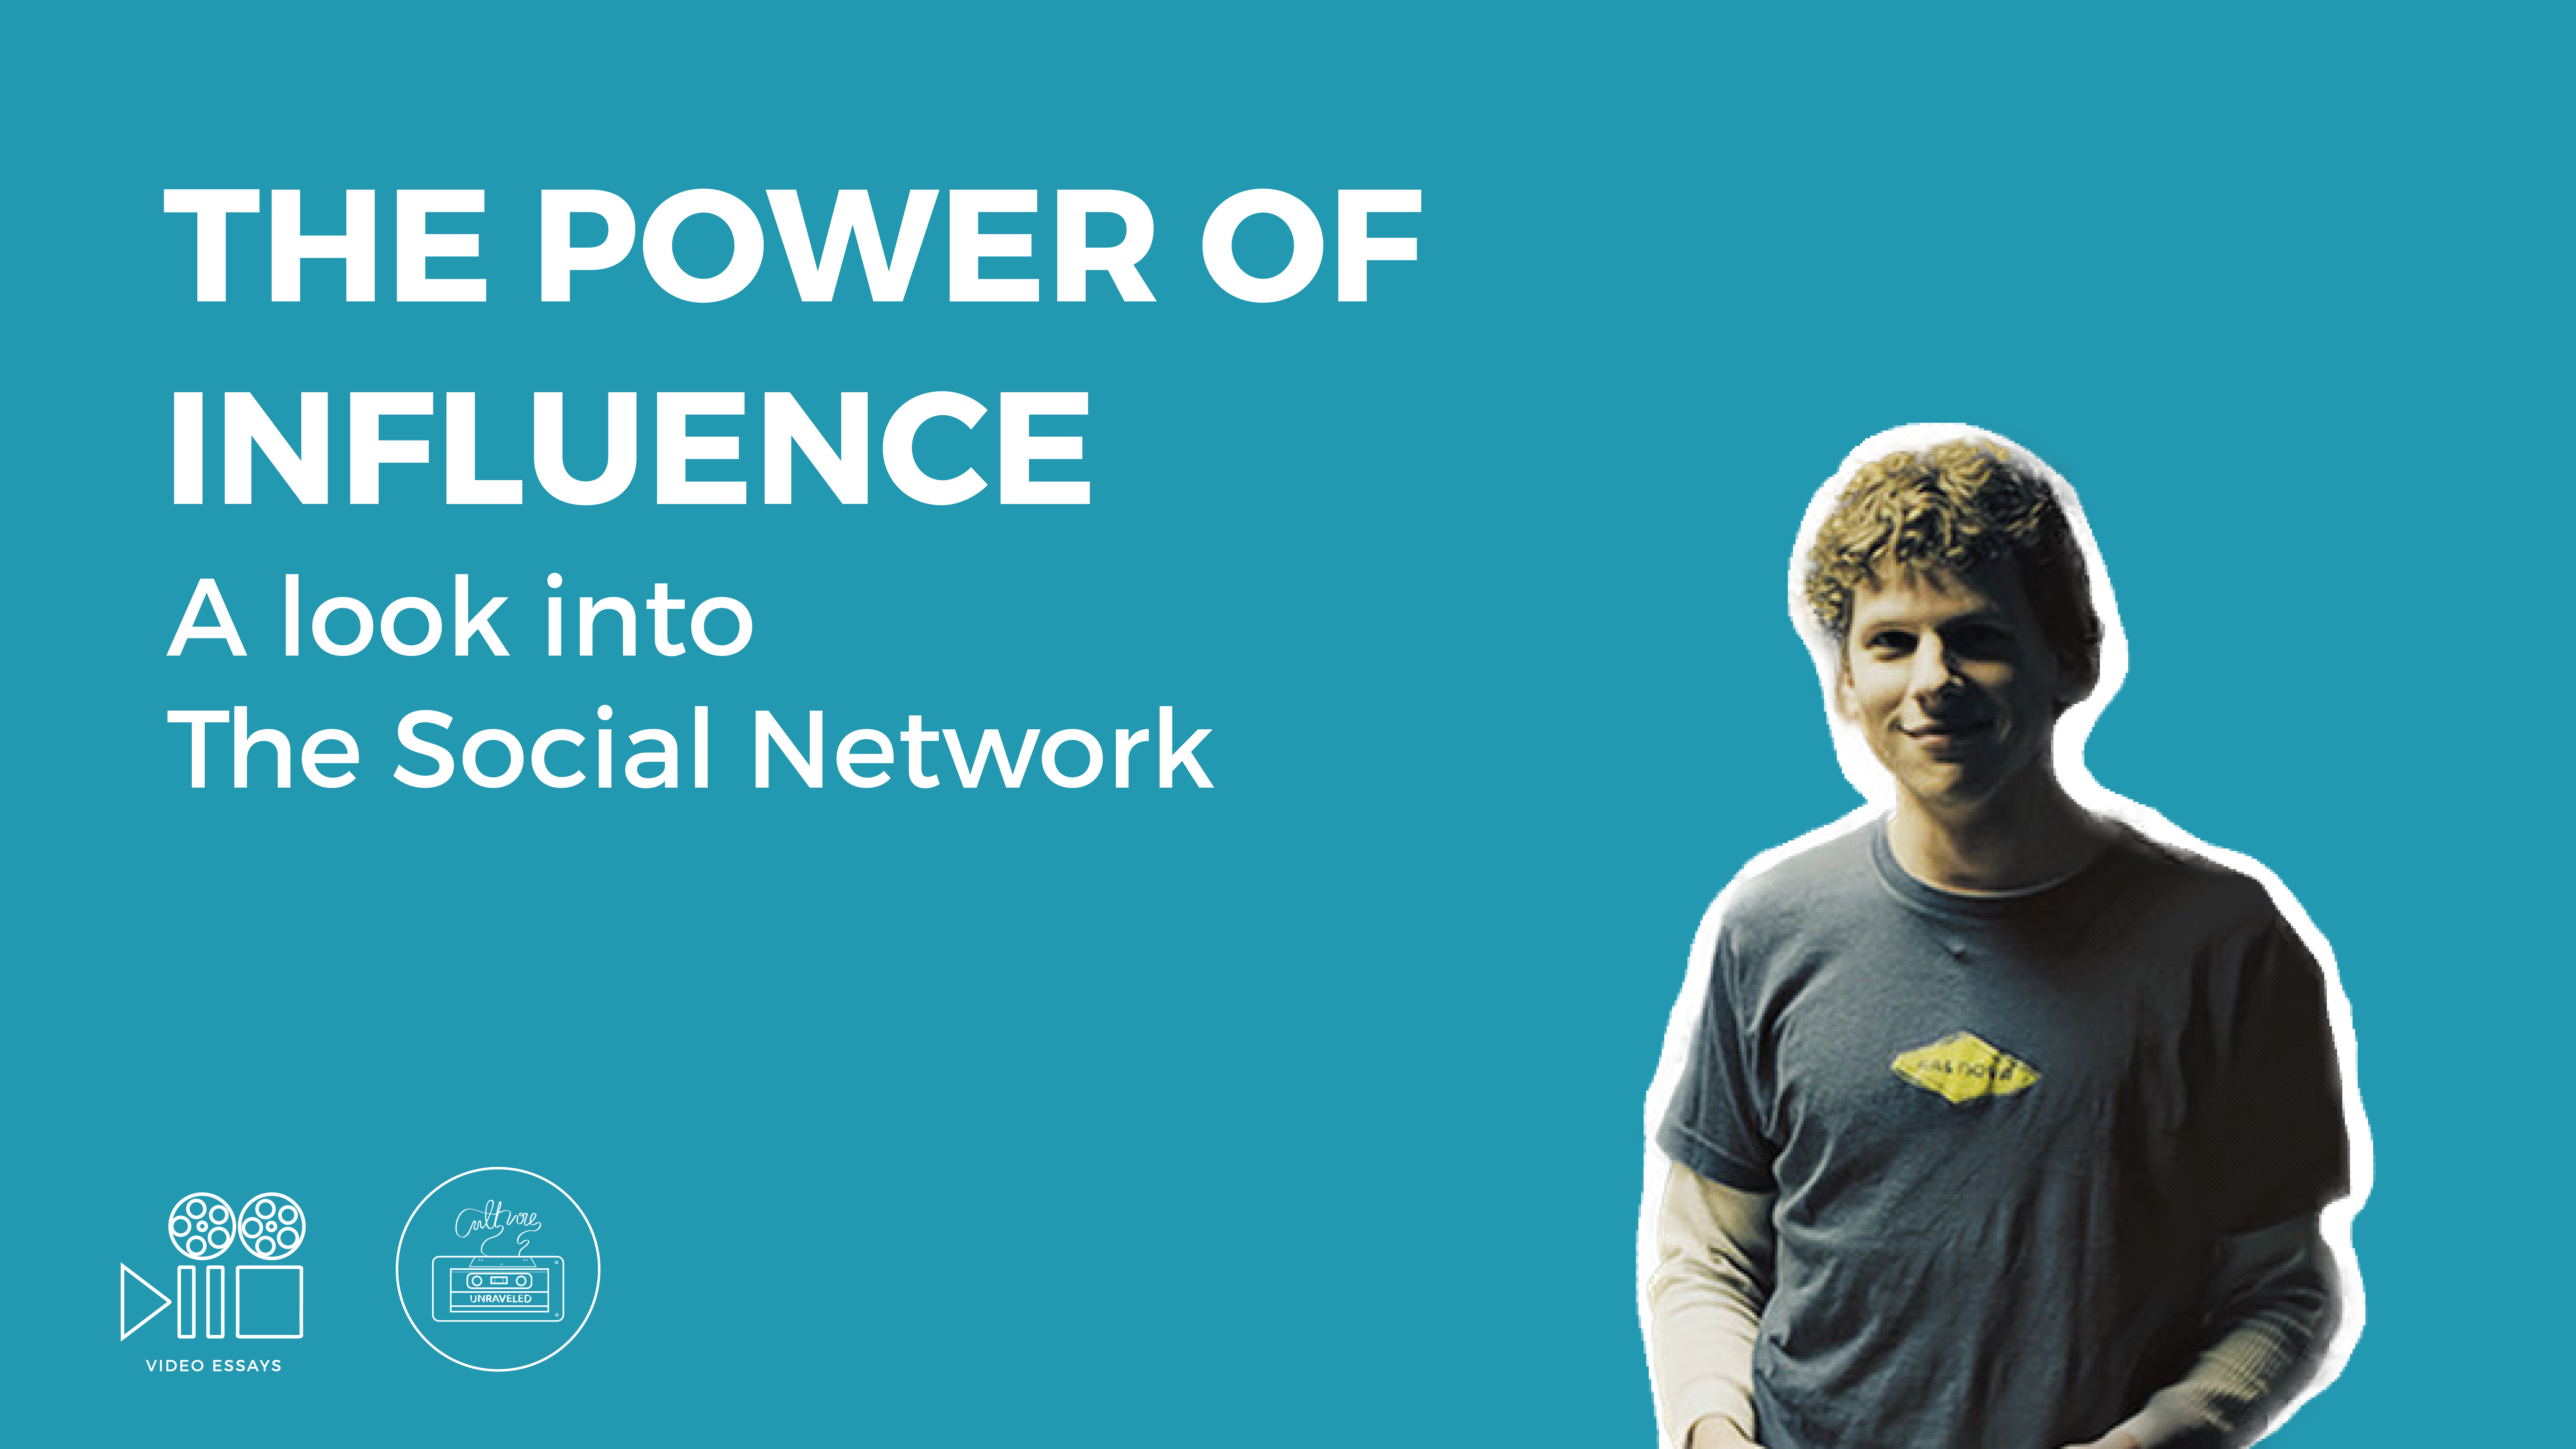 The Power of Influence: A Look into The Social Network